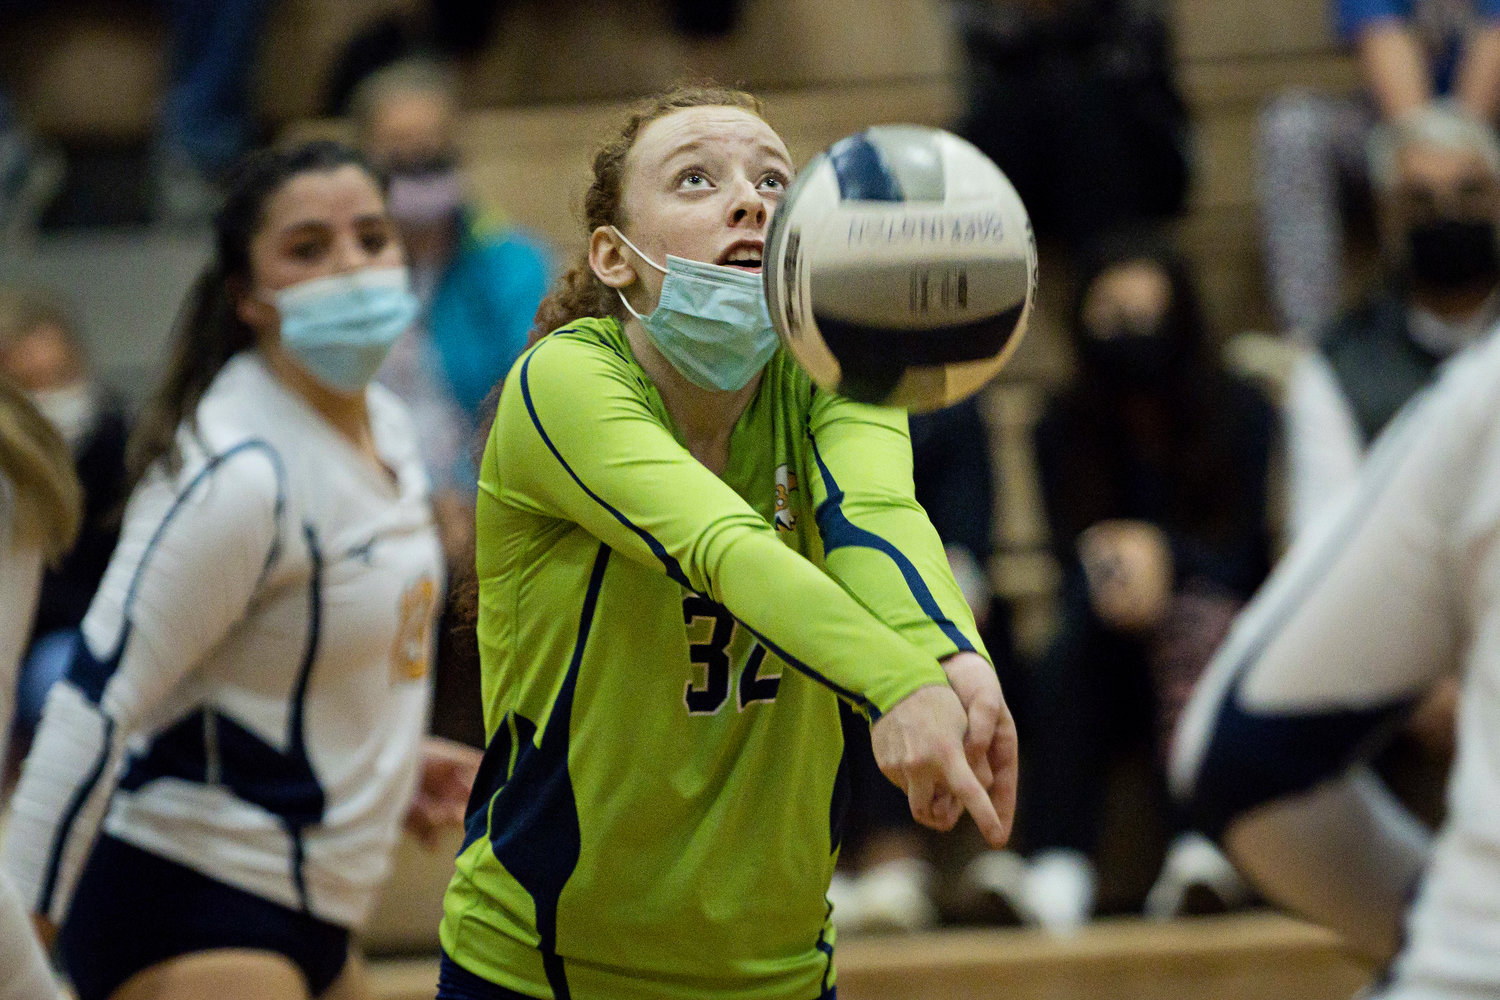 Morgan Martin bumps the ball up for a teammate while rallying with 
Rogers, Monday night.